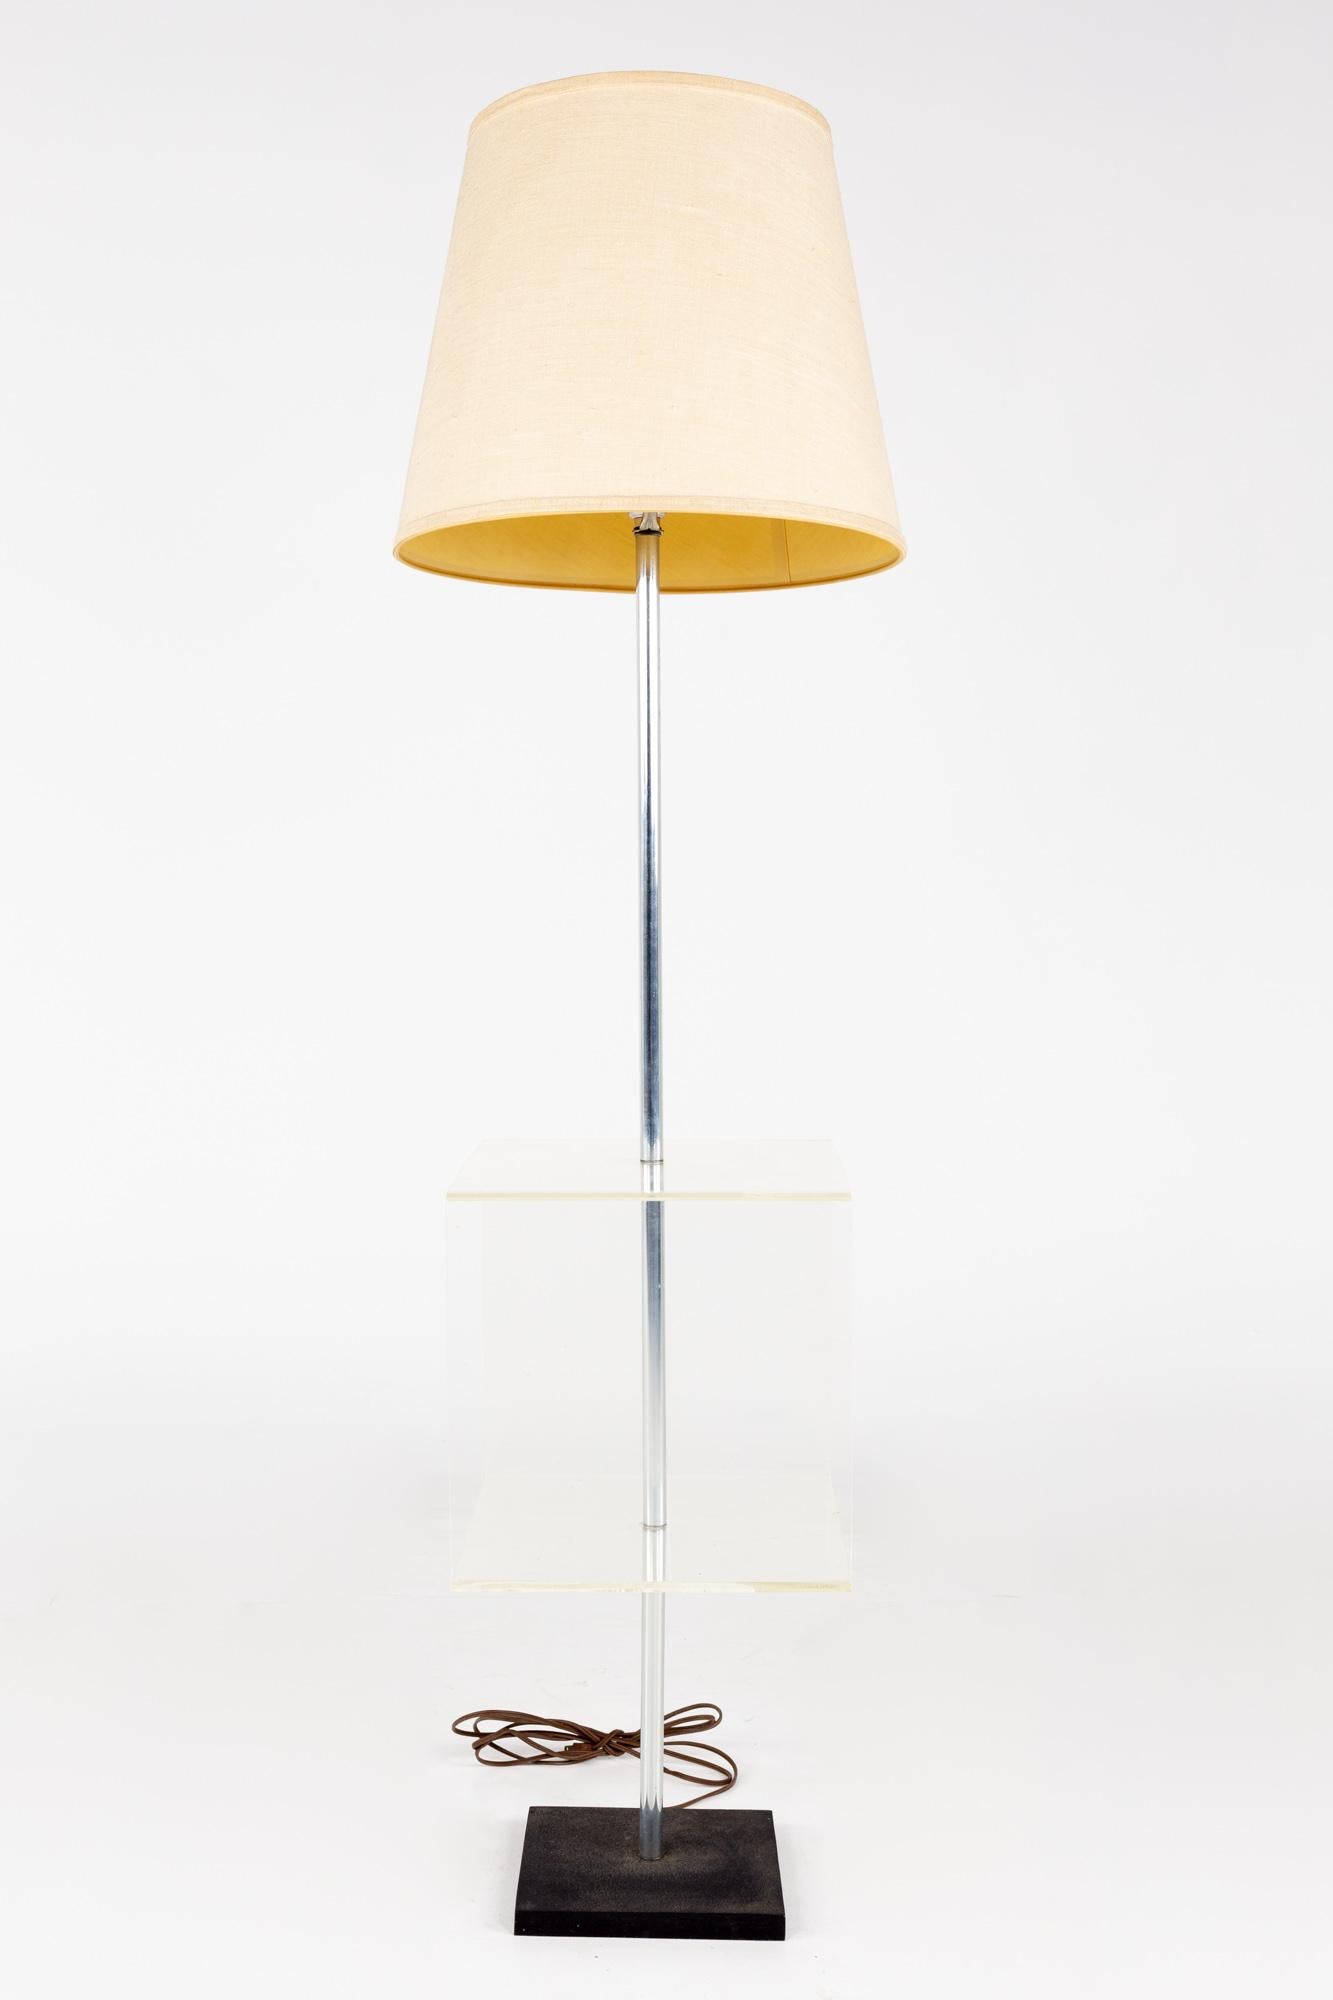 Mid century Lucite table floor lamp

This lamp measures: 16 wide x 16 deep x 56 inches high

This lamp is in good vintage condition

We take our photos in a controlled lighting studio to show as much detail as possible. We do not photoshop out